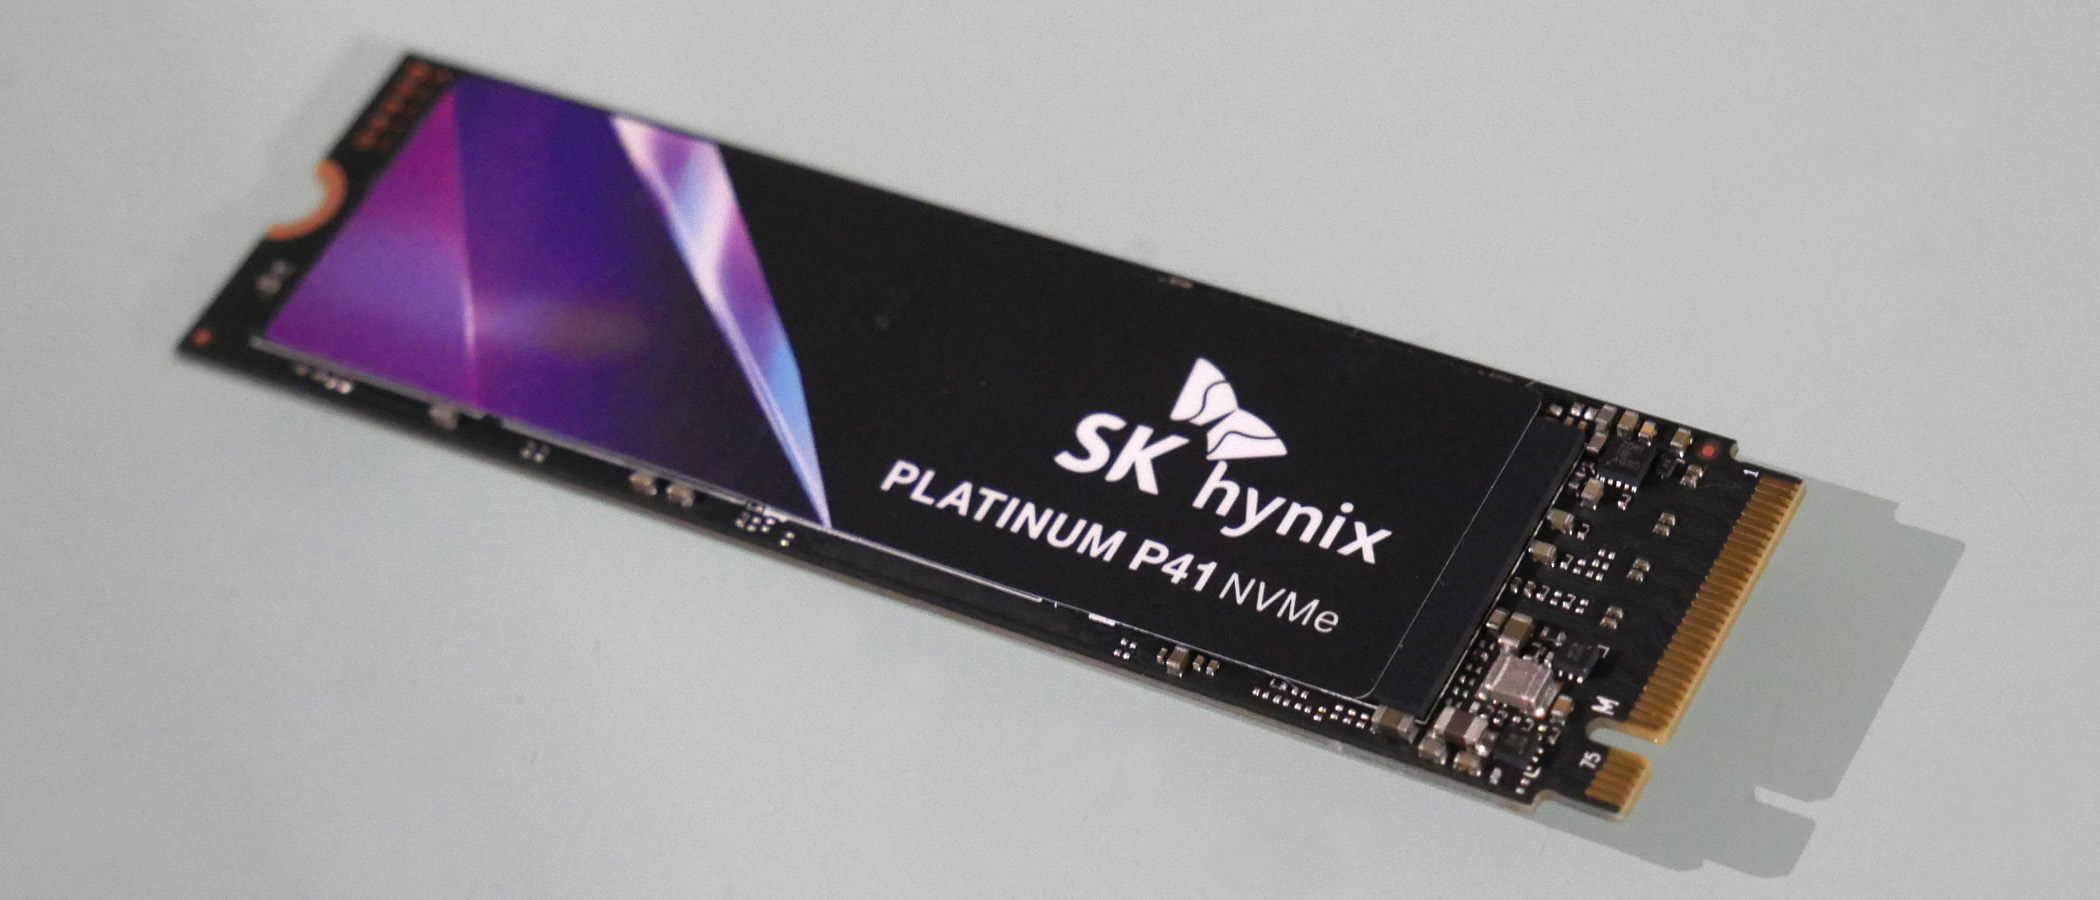 SK Hynix Platinum P41 review: As good as any of the best Gen 4 drives